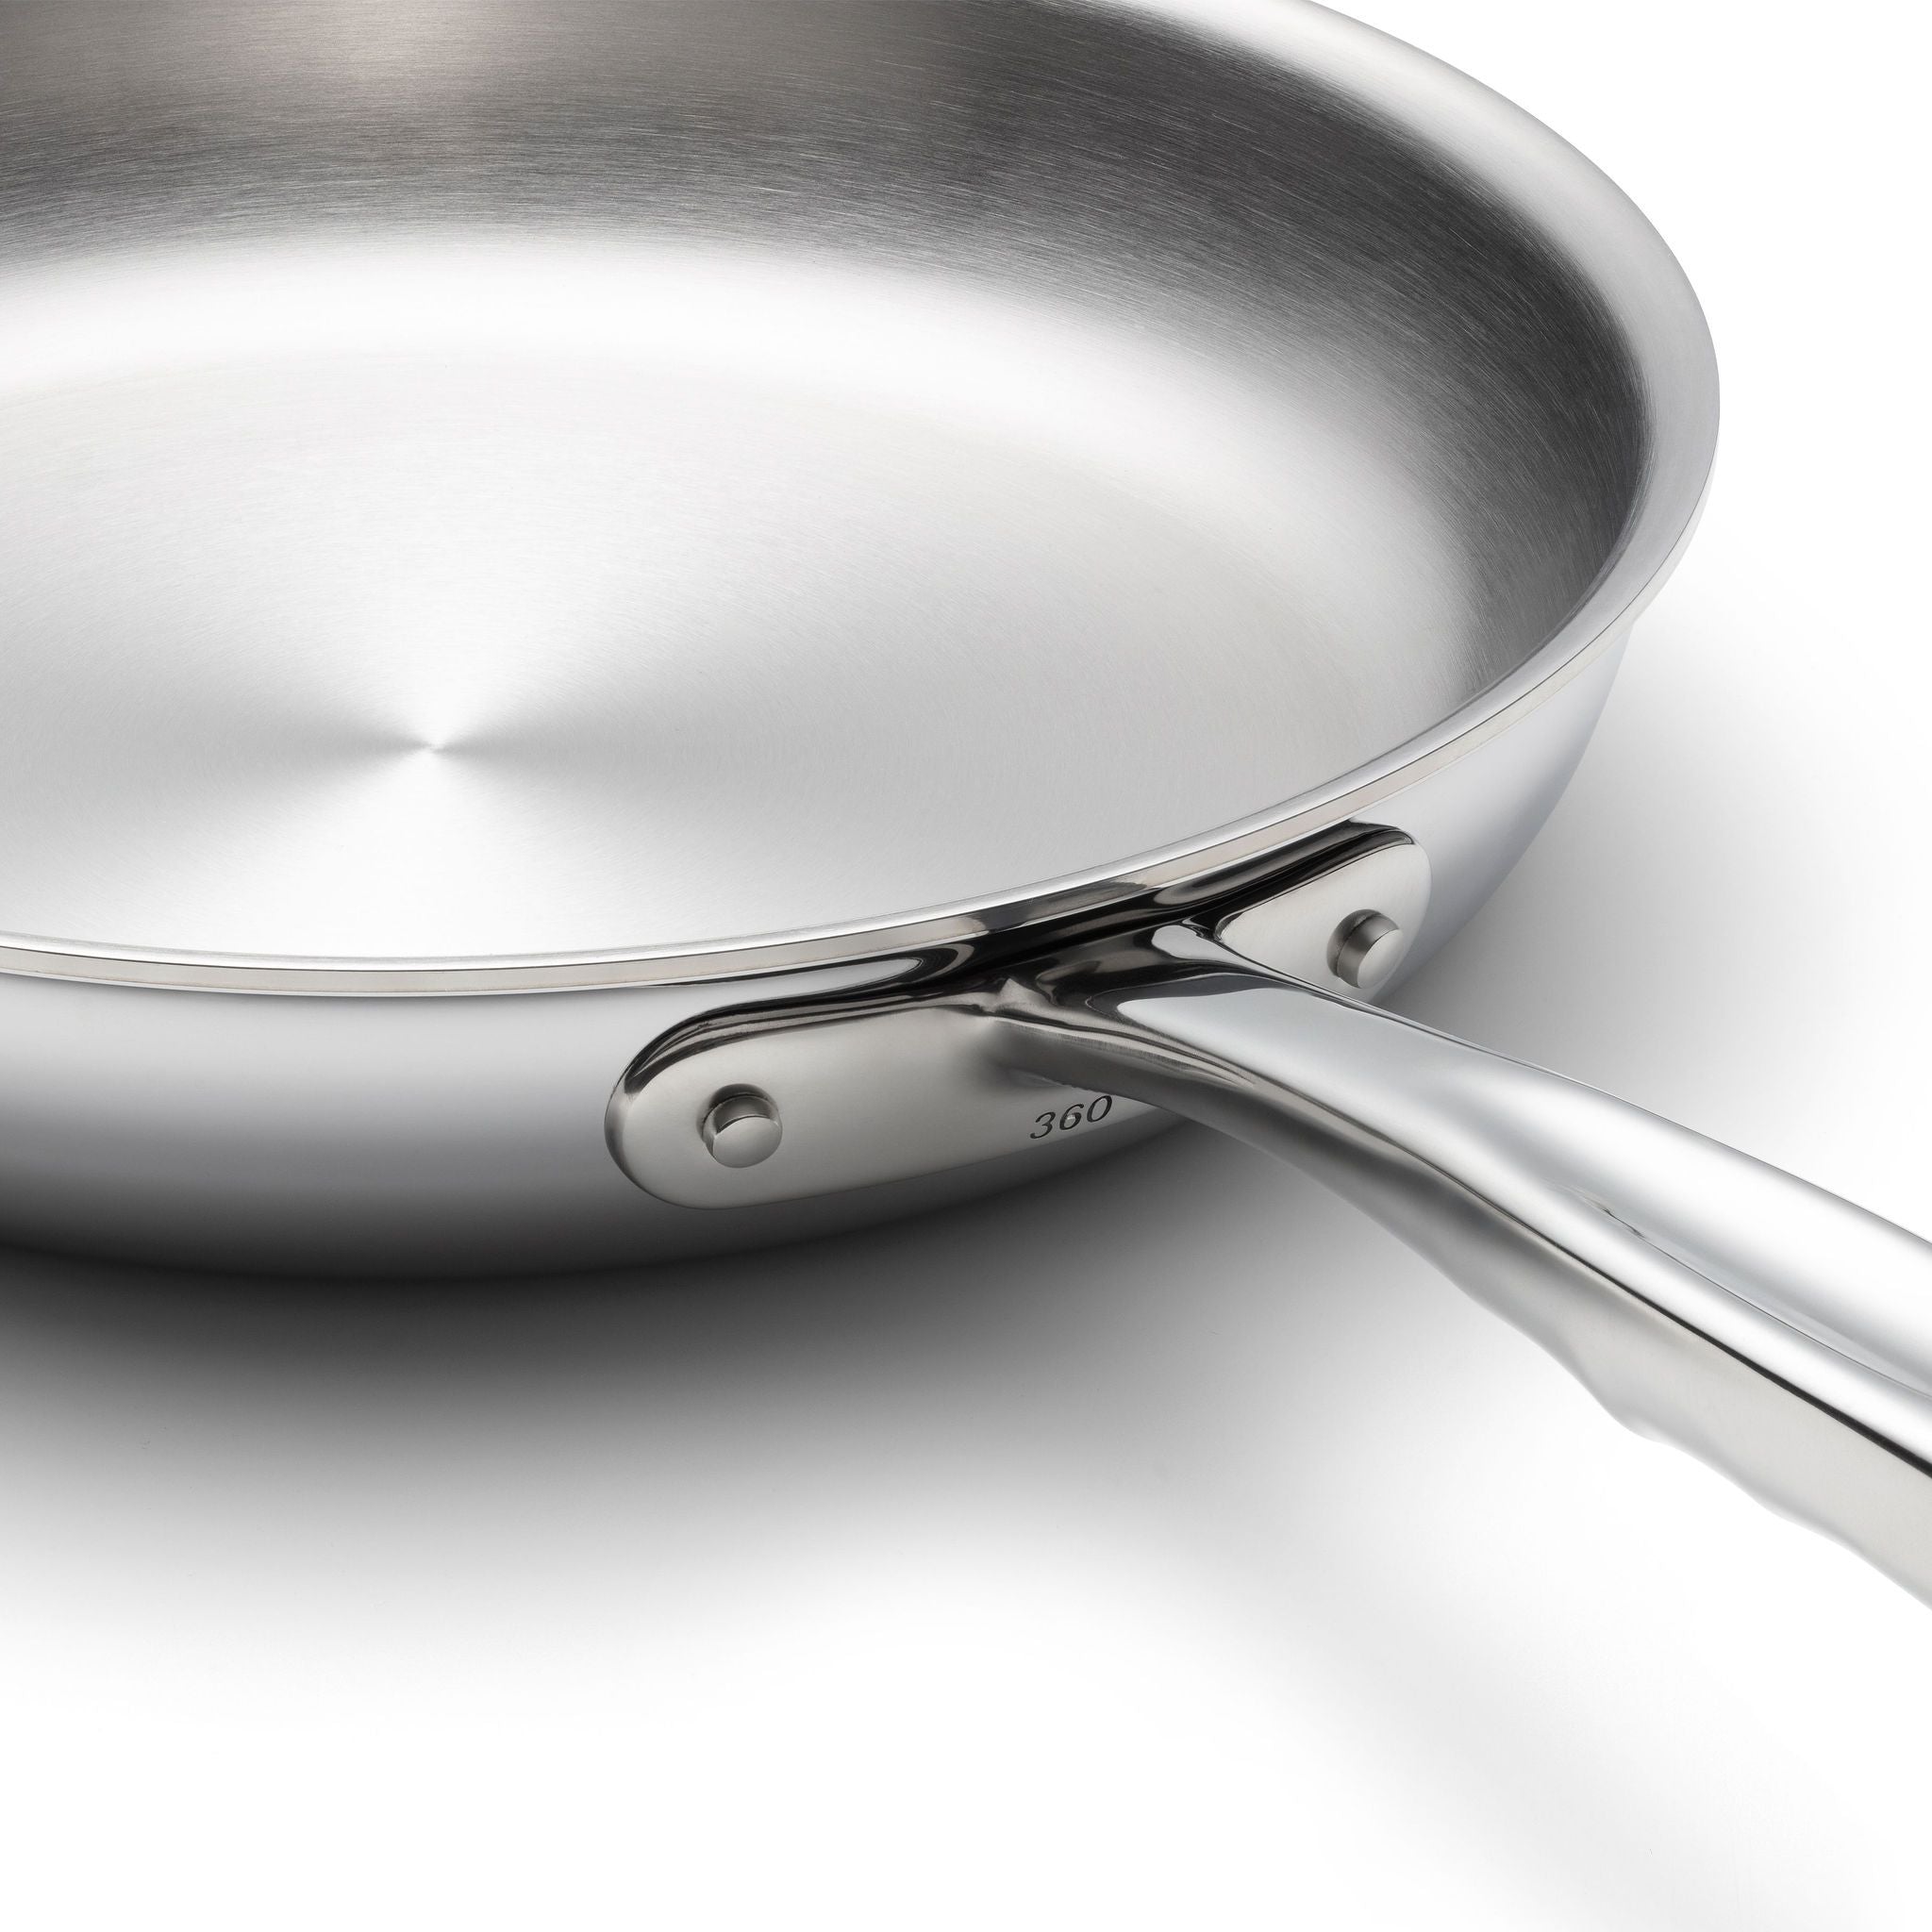 360 Cookware Stainless Steel